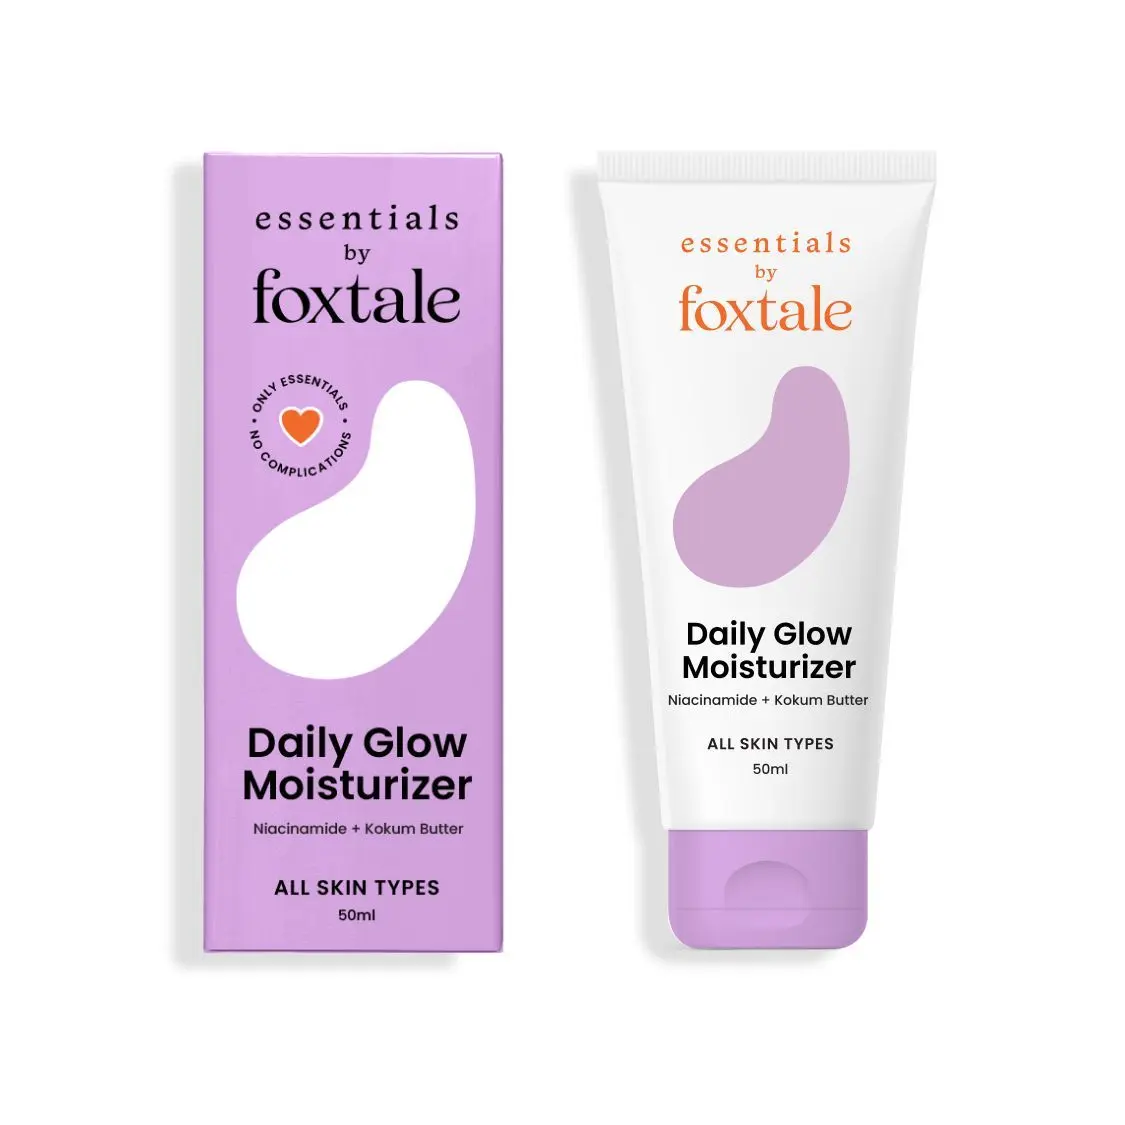 Foxtale Essentials Daily Moisturizer For Face - 50ml